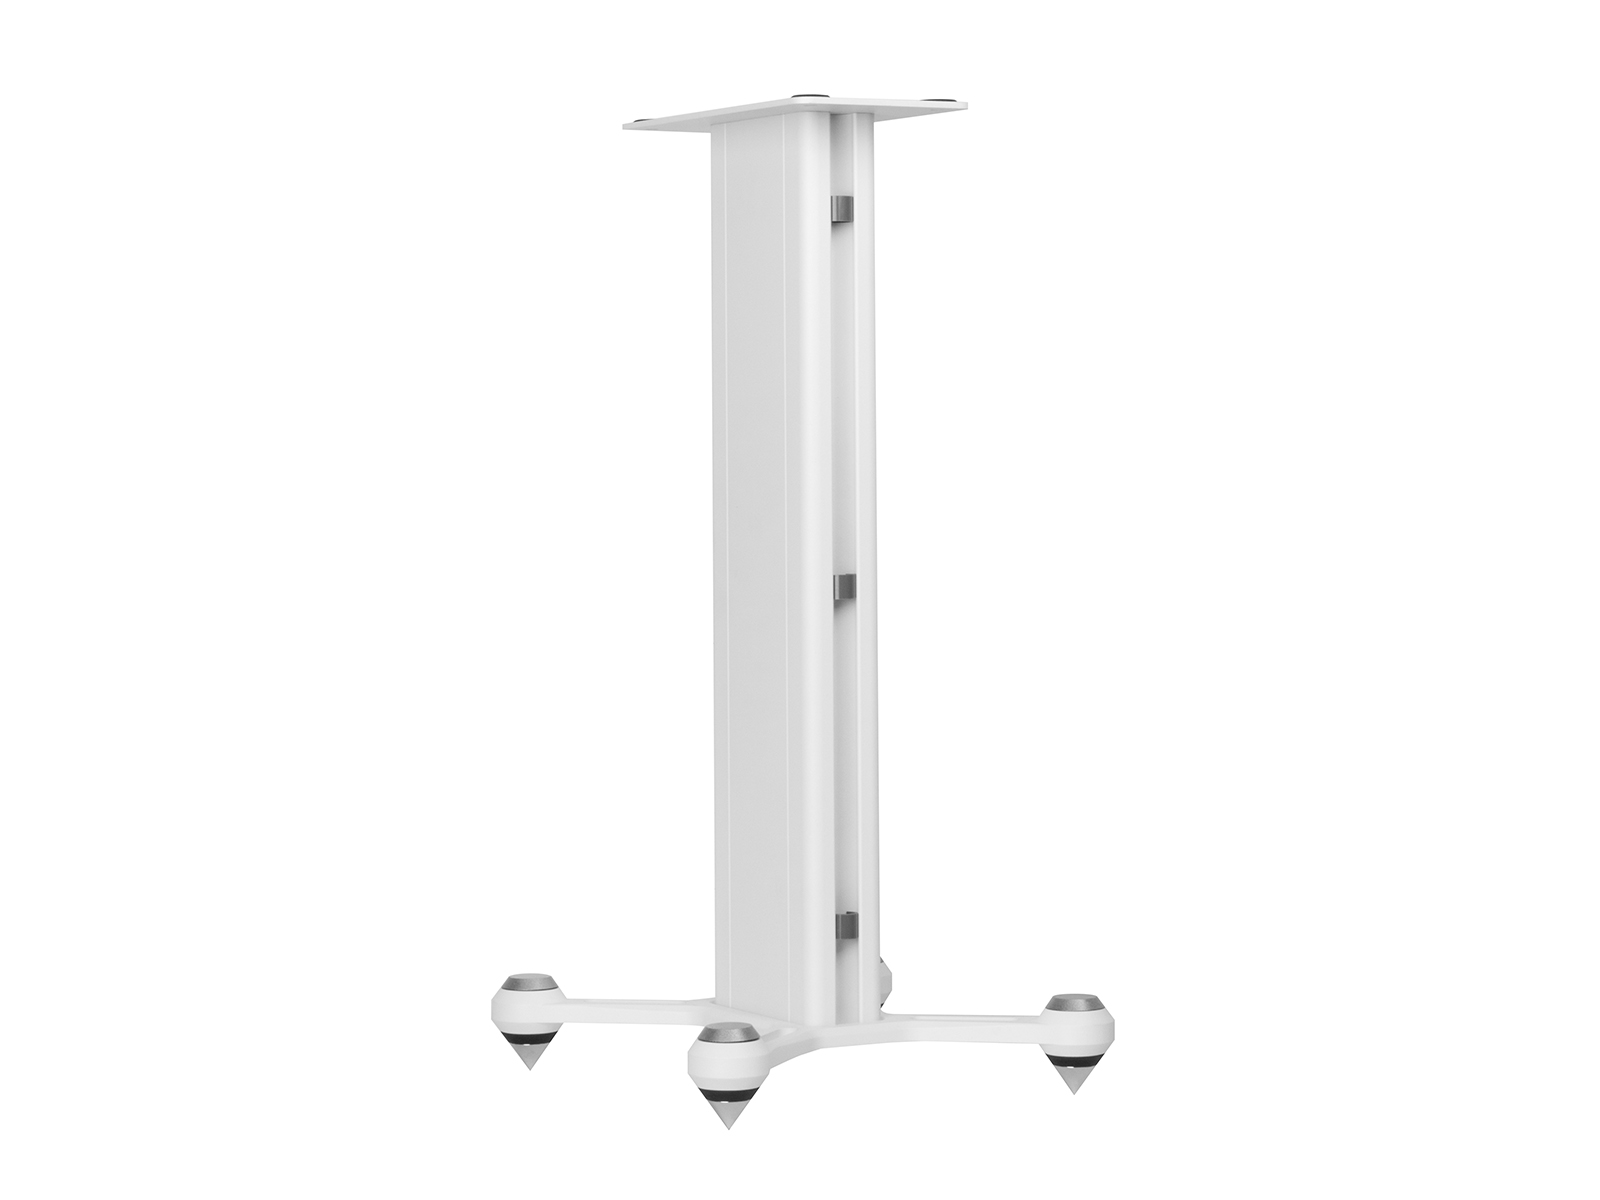 Speaker STAND, rear view in a white finish.